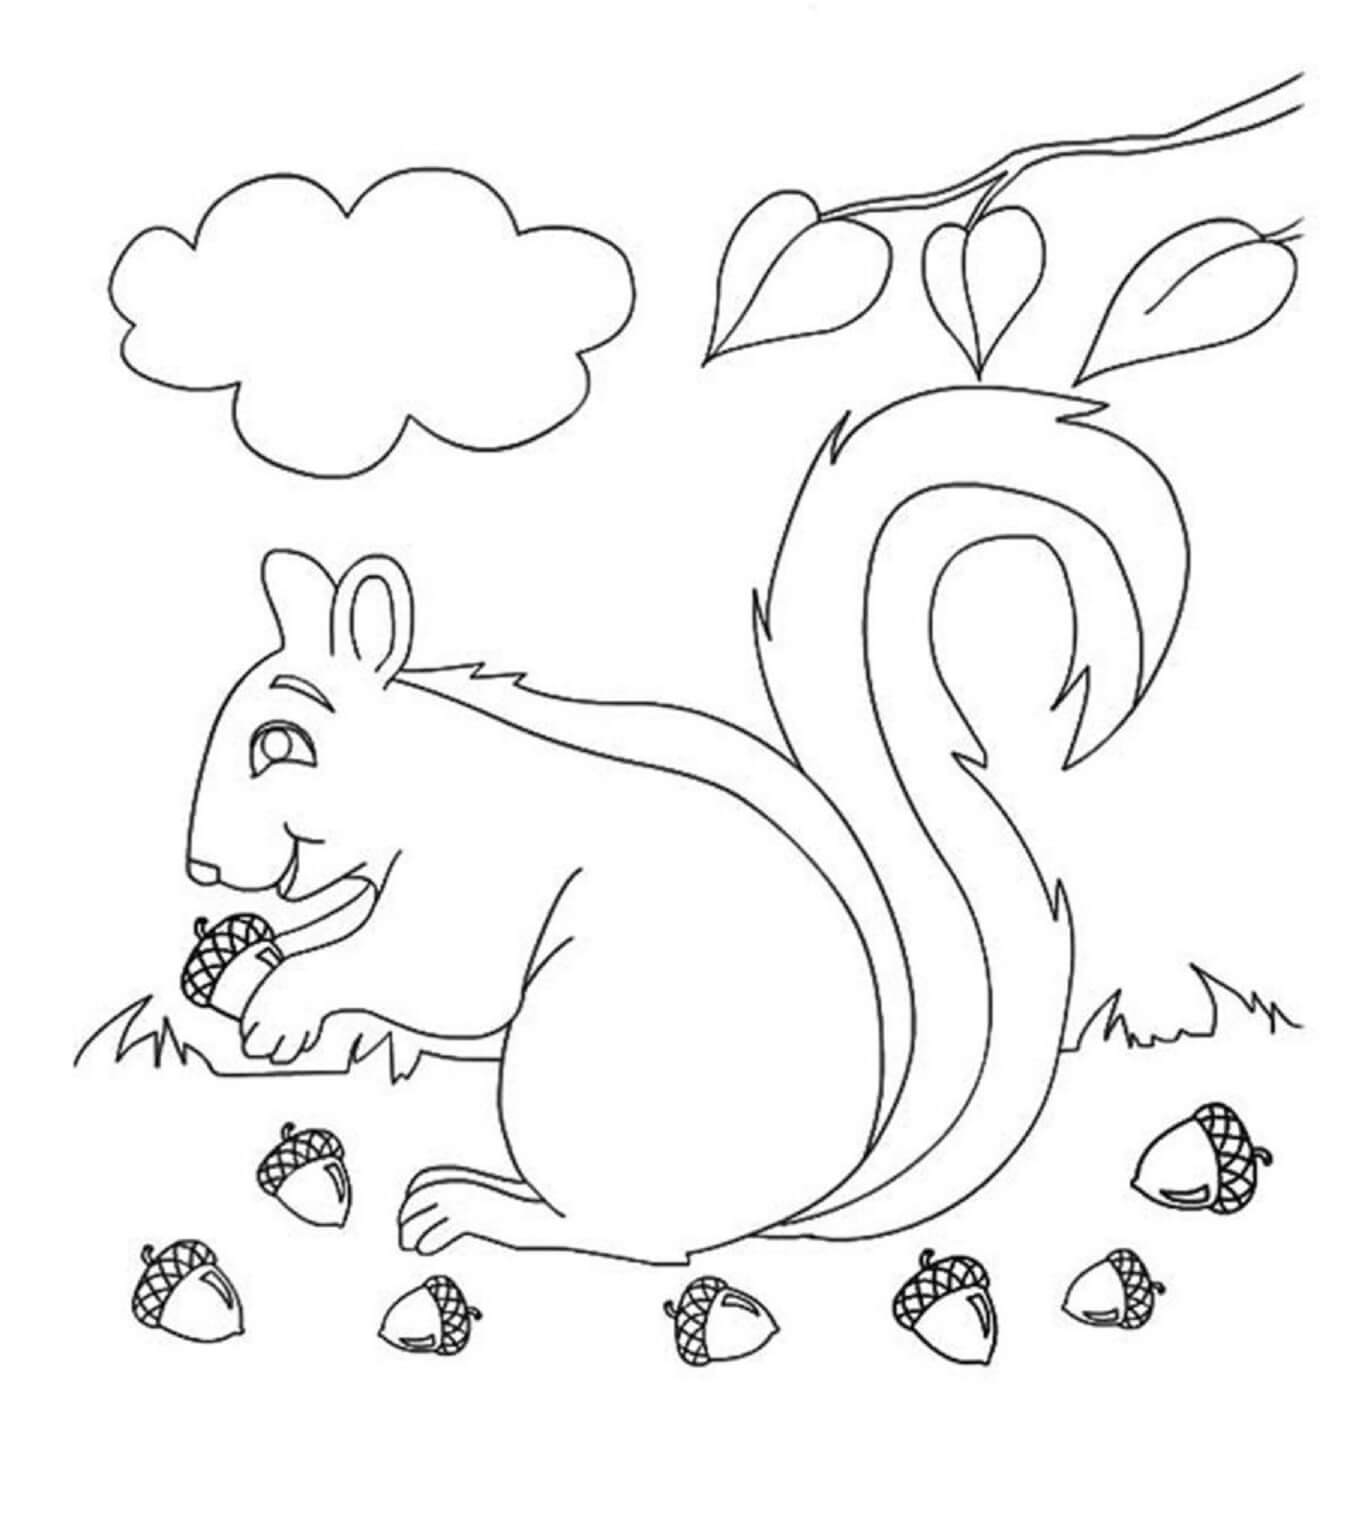 Funny squirrel holding acorn in autumn coloring page